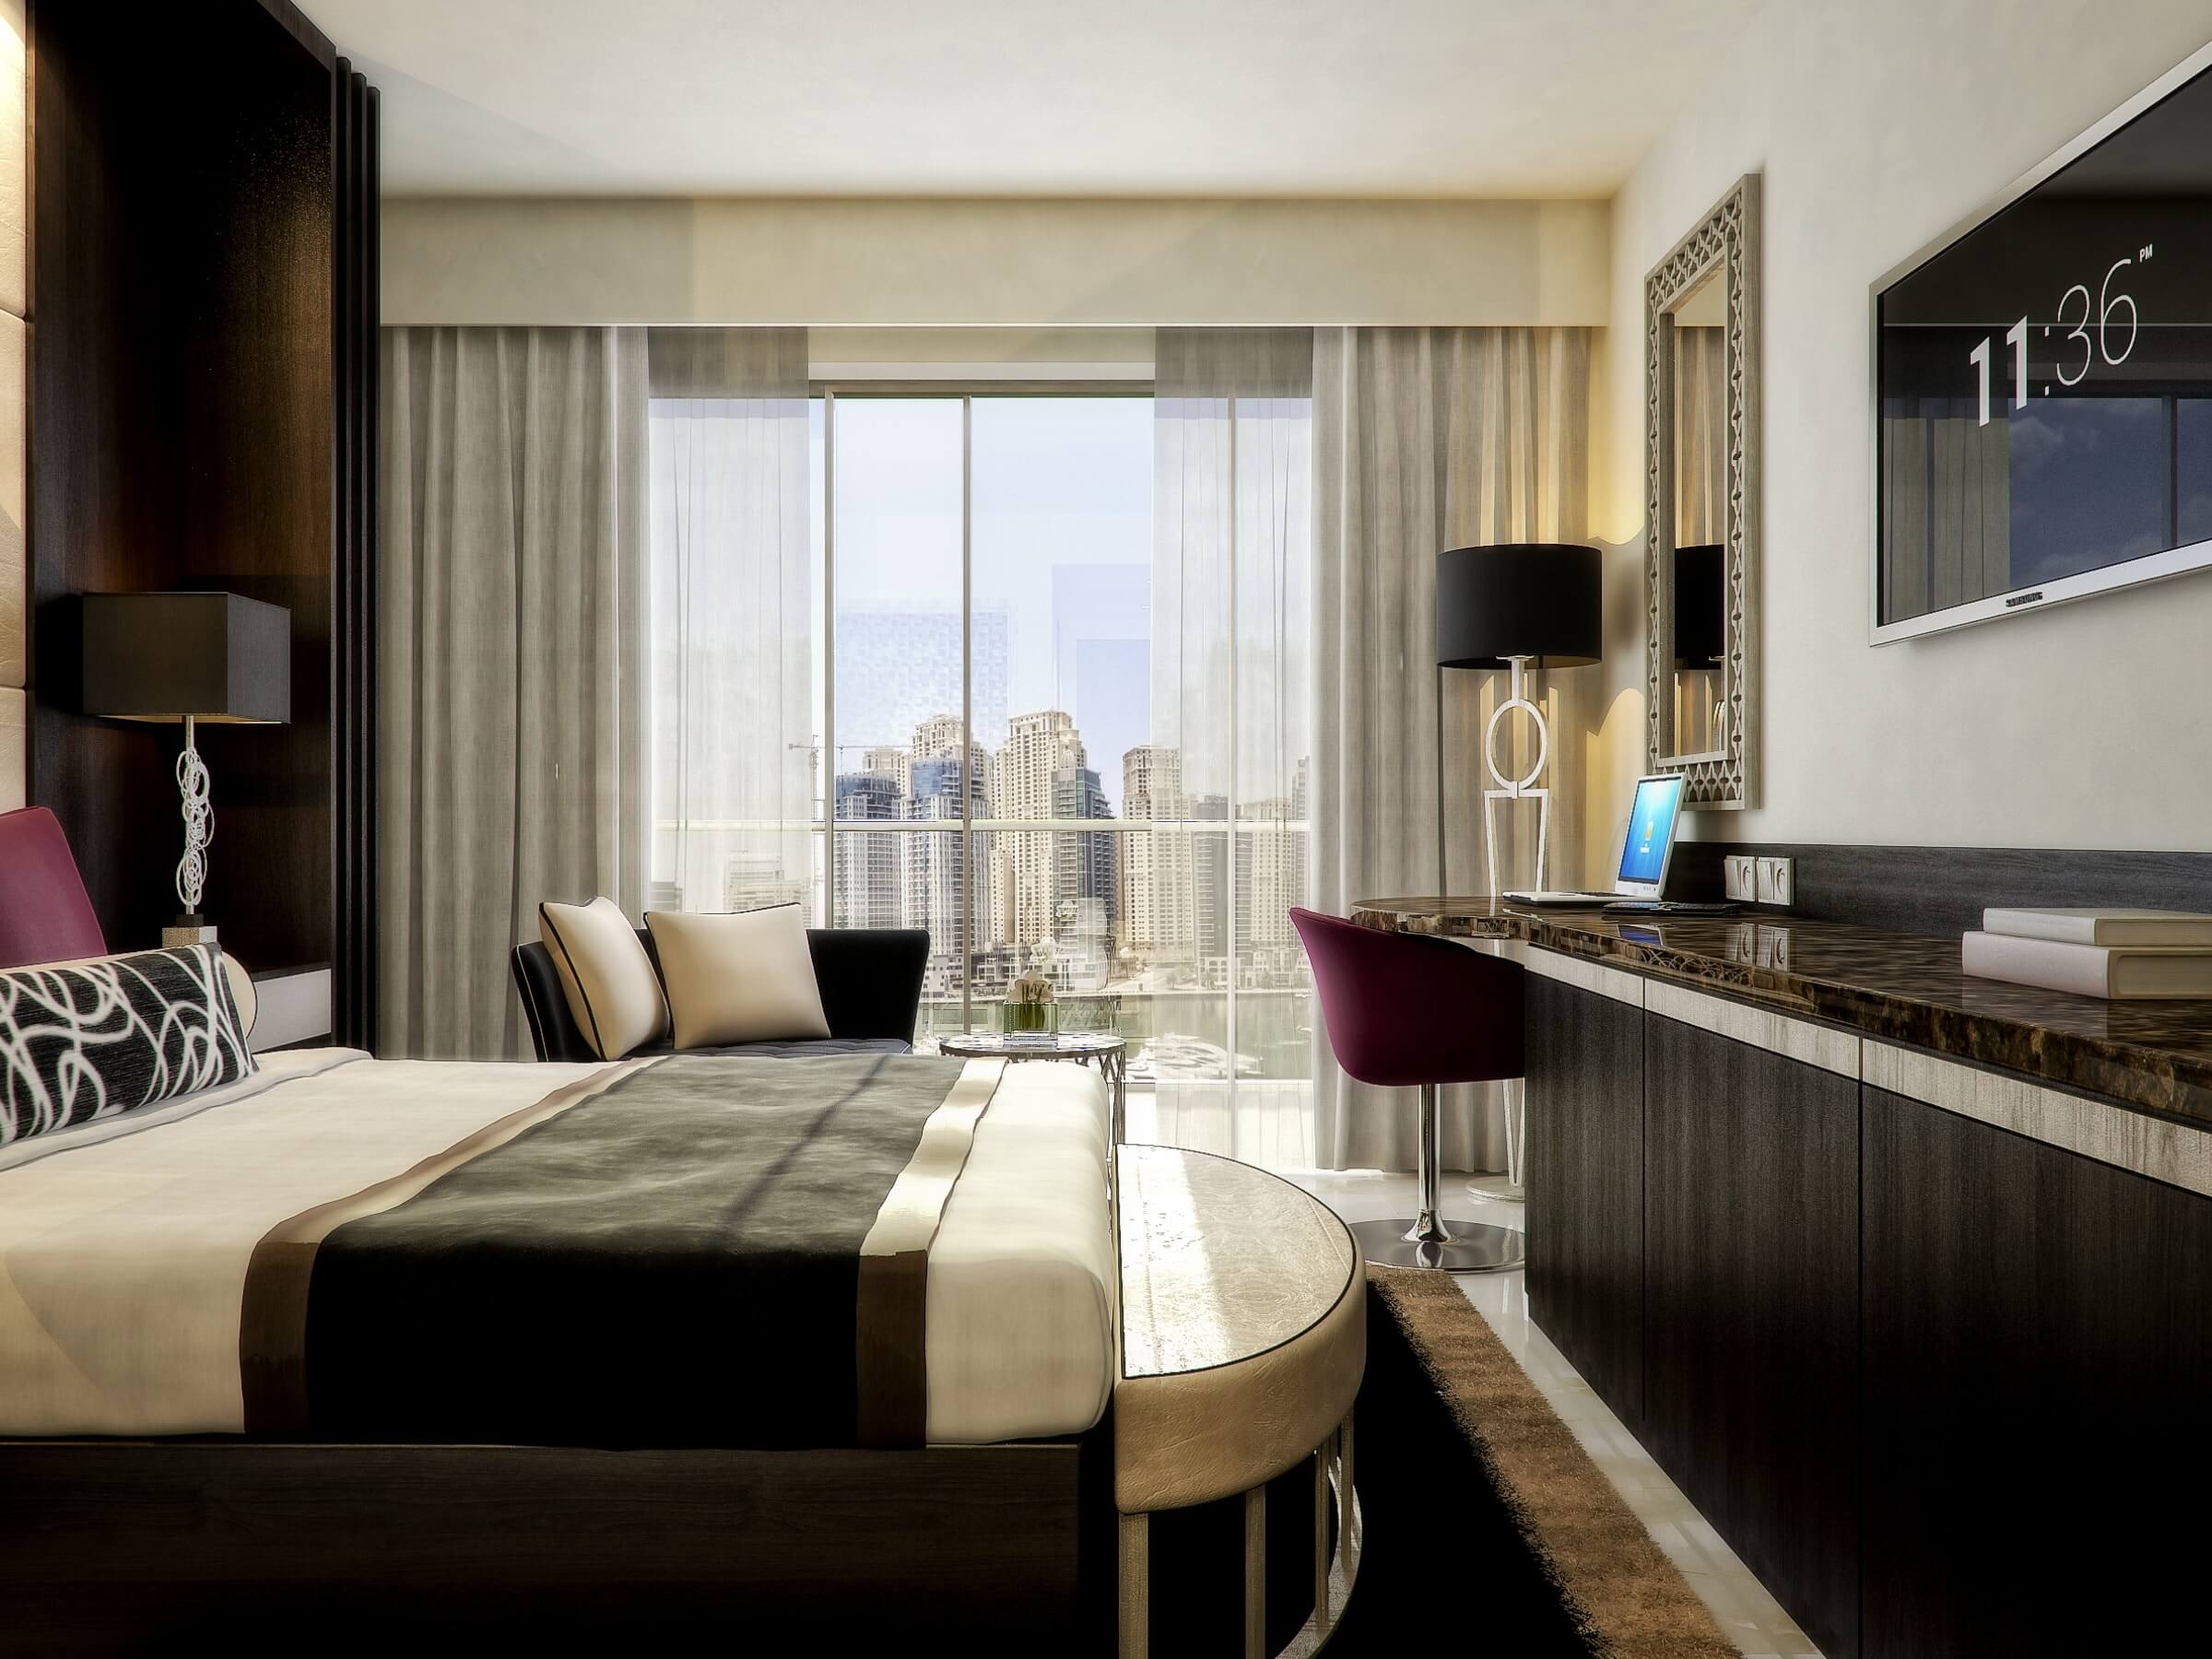 Deluxe Room with Balcony at Millennium Place Marina Millennium Place Marina Dubai 04 550 8100